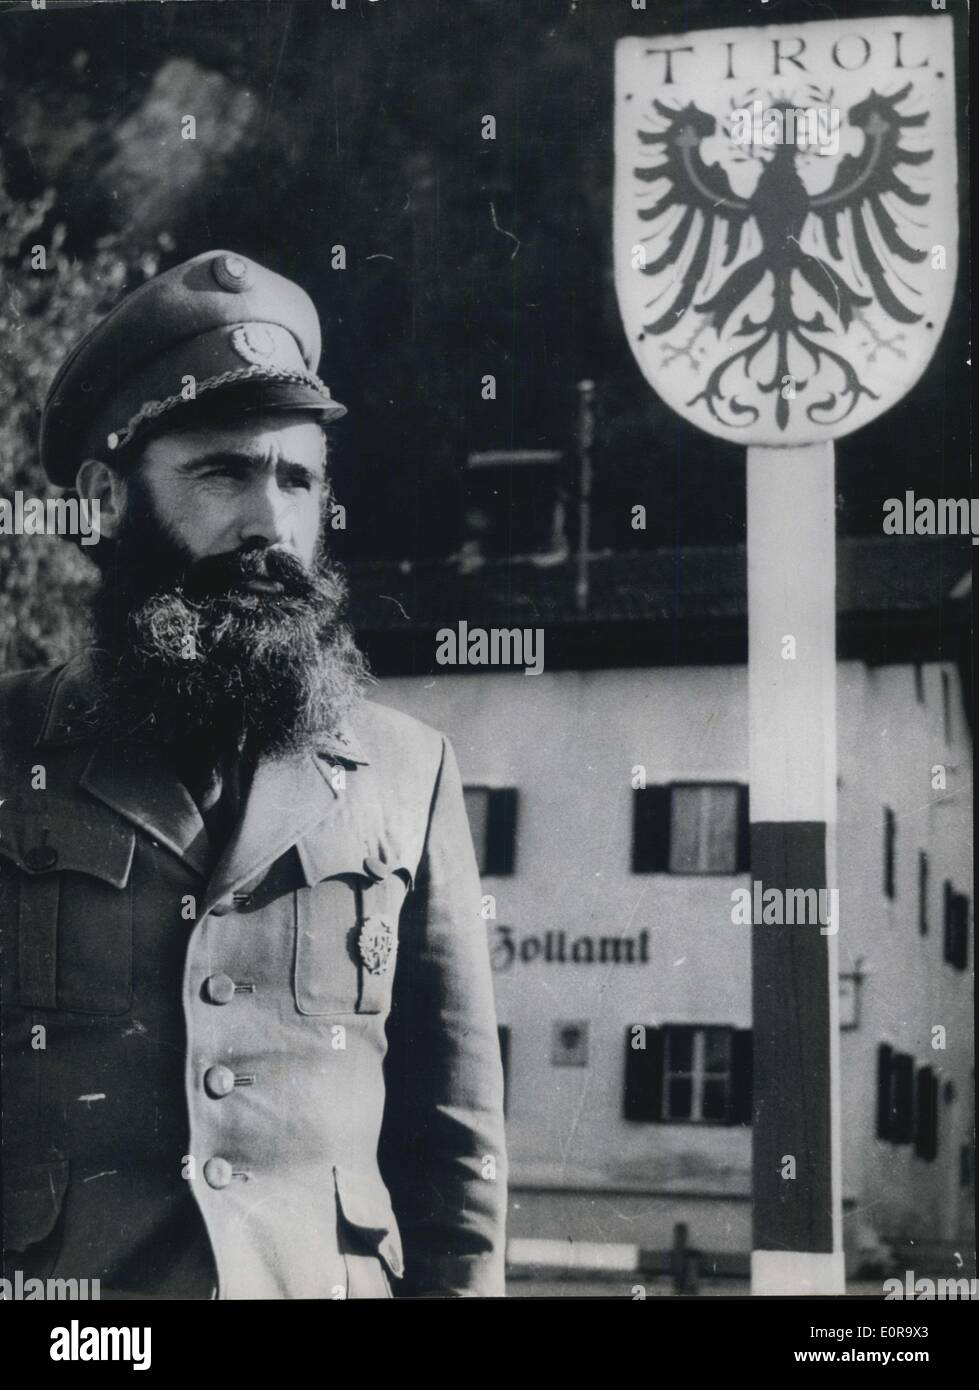 Nov. 05, 1958 - An official permitted full beard: The 40 years old Austrian  border-custom policeman Andreas Habischer has an official permitted full  beard and wars als long hair. He will play